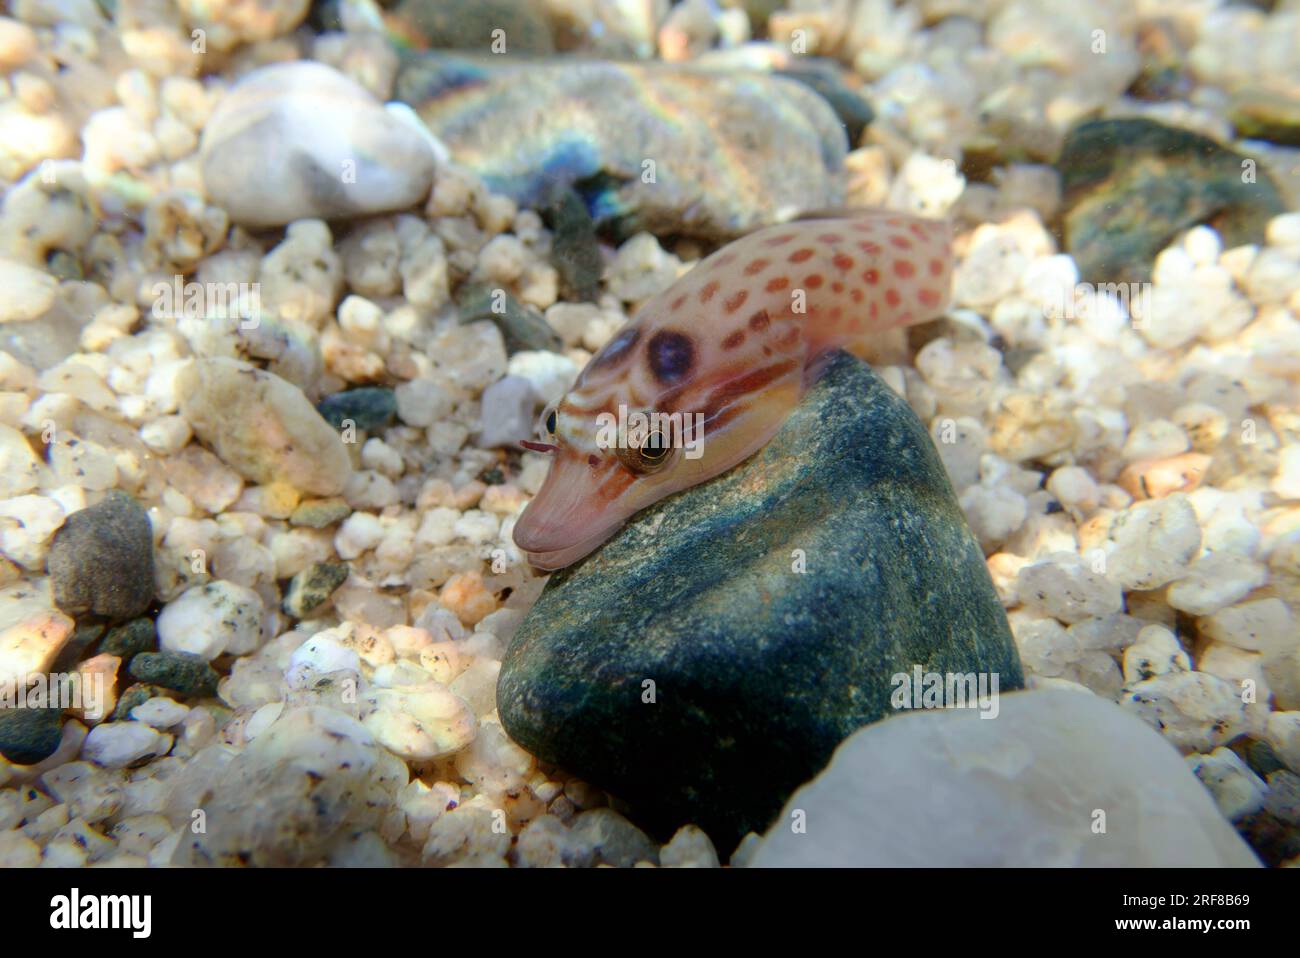 The shore clingfish - (Lepadogaster lepadogaster), underwater image into the Mediterranean sea Stock Photo